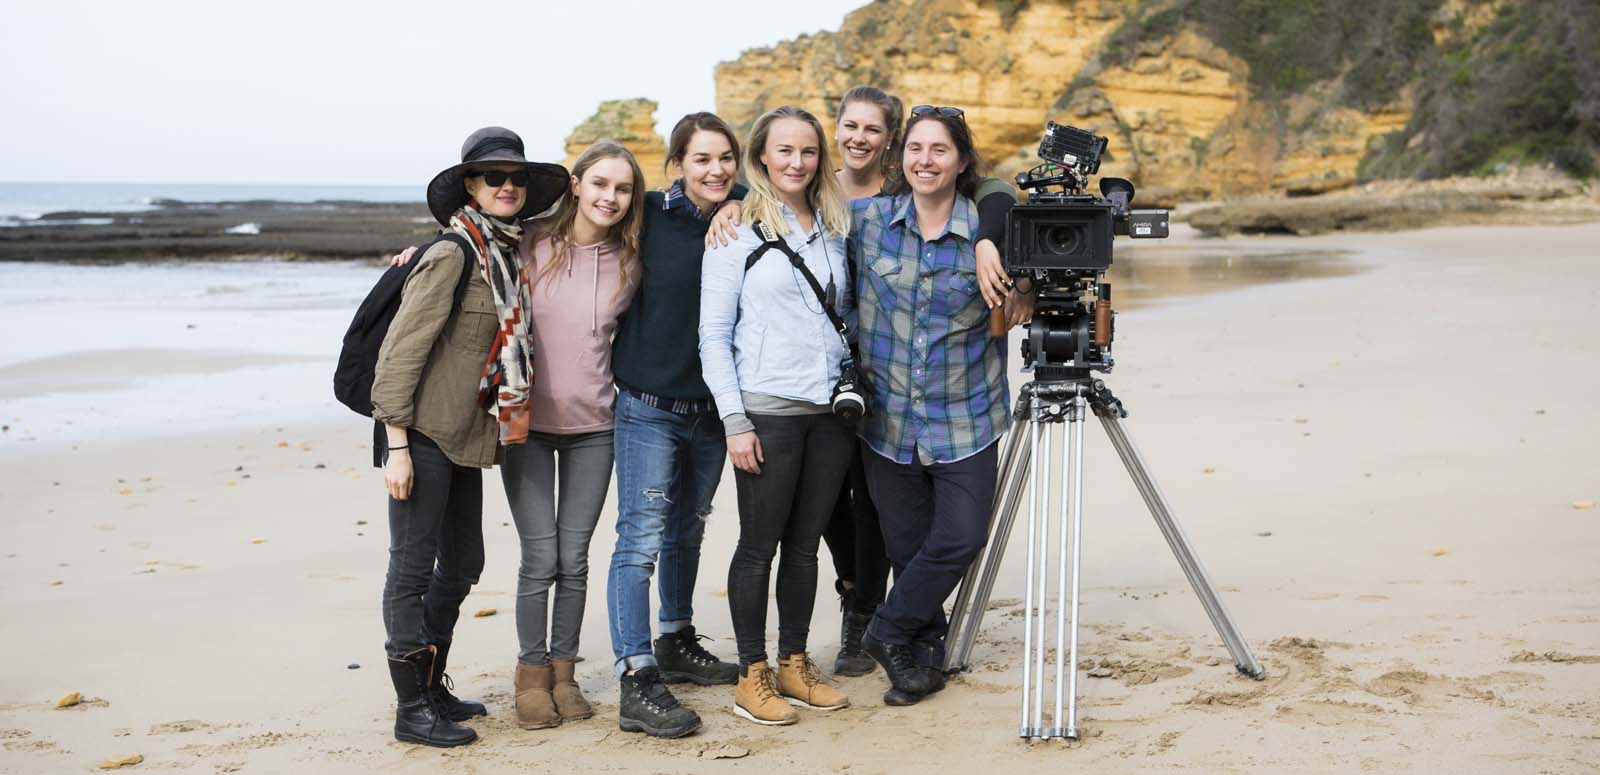 The female cast and camera crew of the film Undertow pose on a beach with a film camera during production